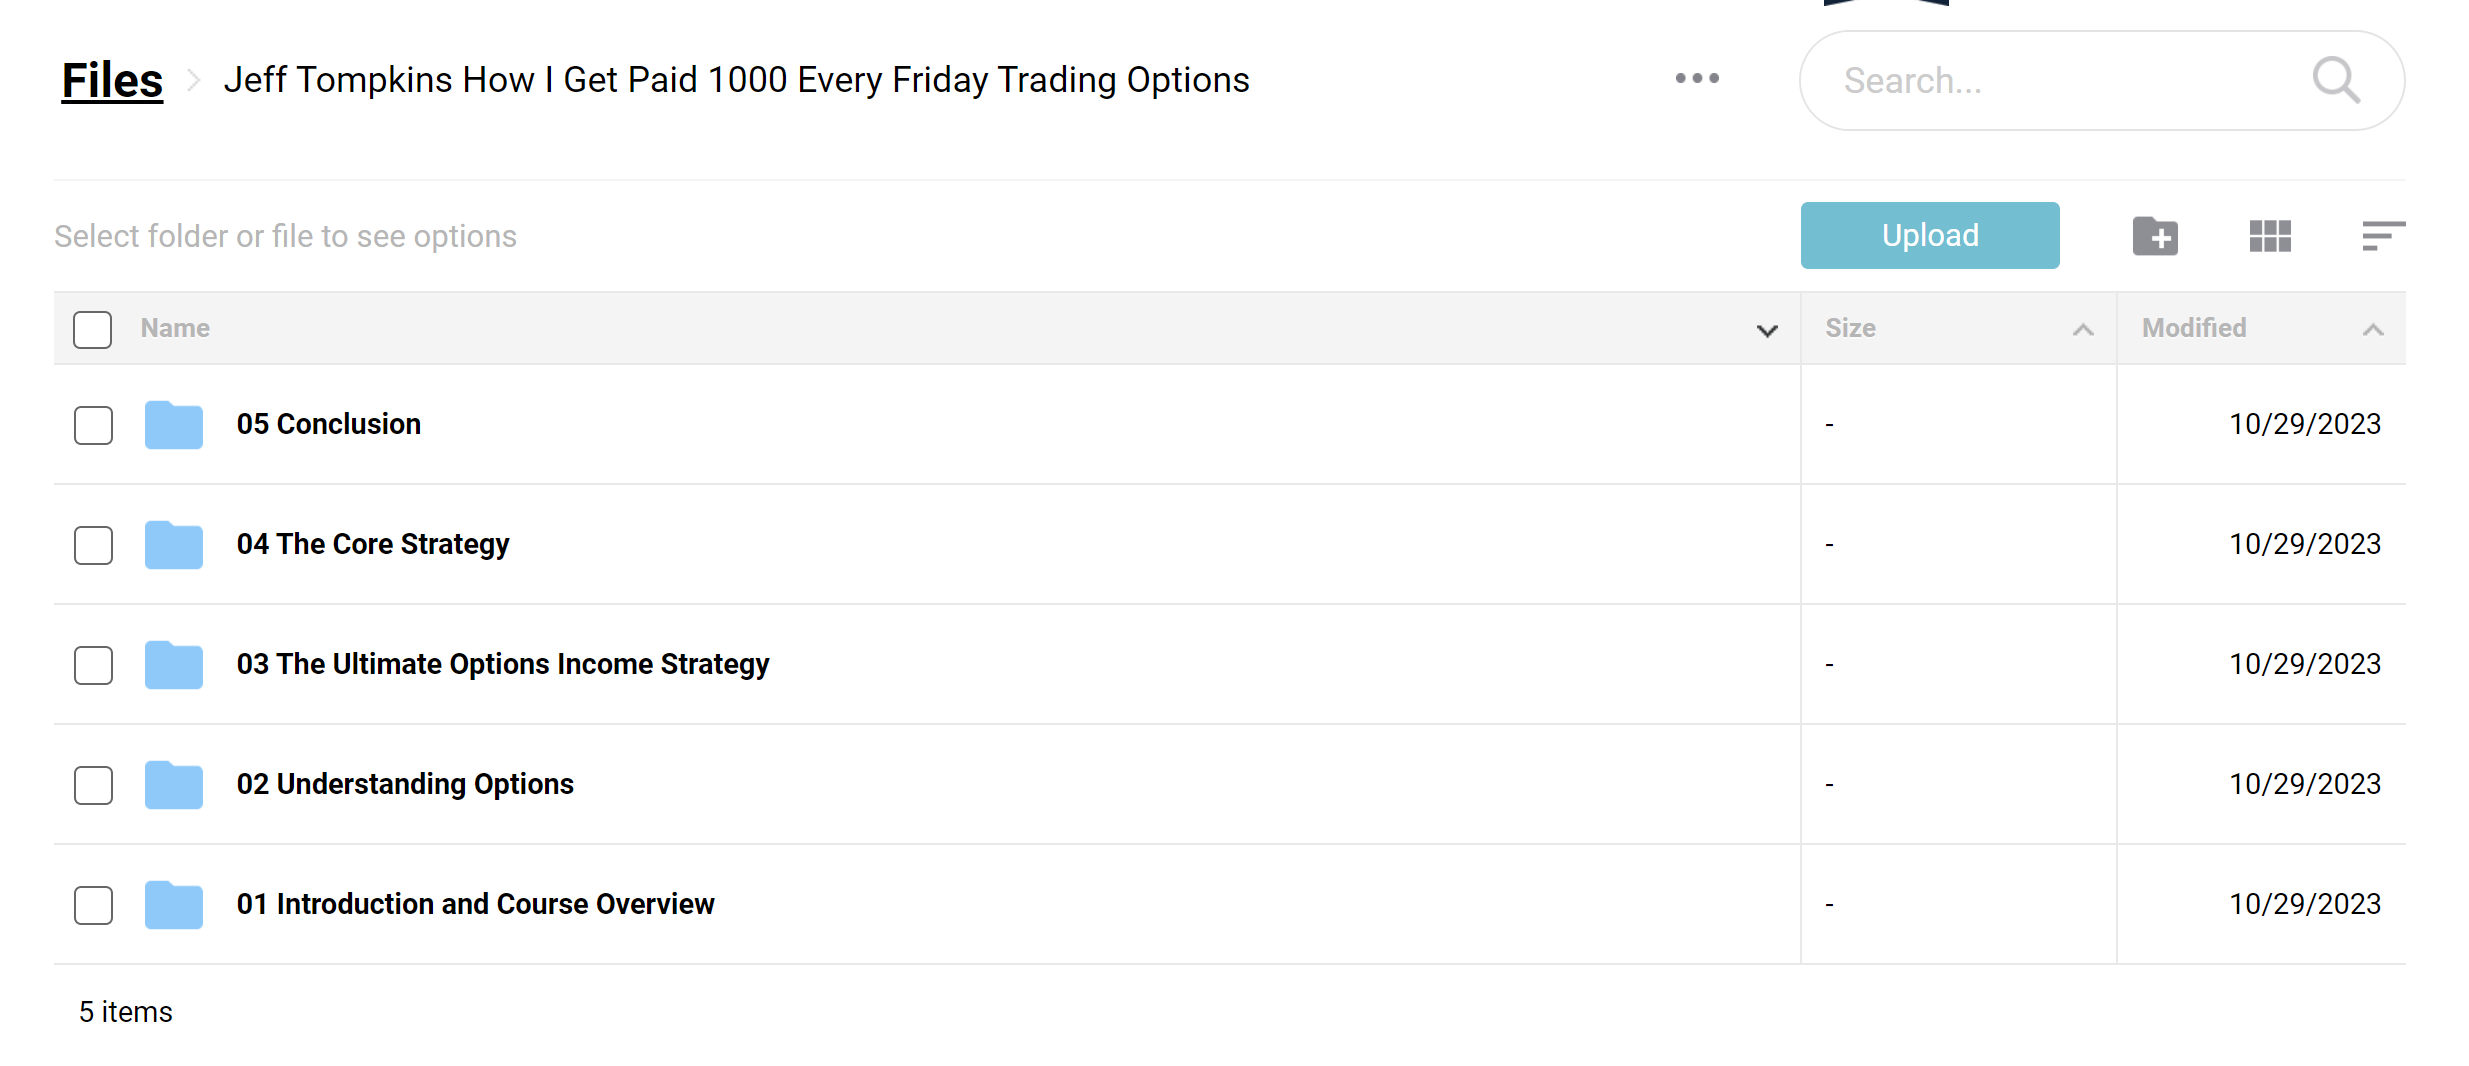 Jeff Tompkins How I Get Paid $1,000 Every Friday Trading Options